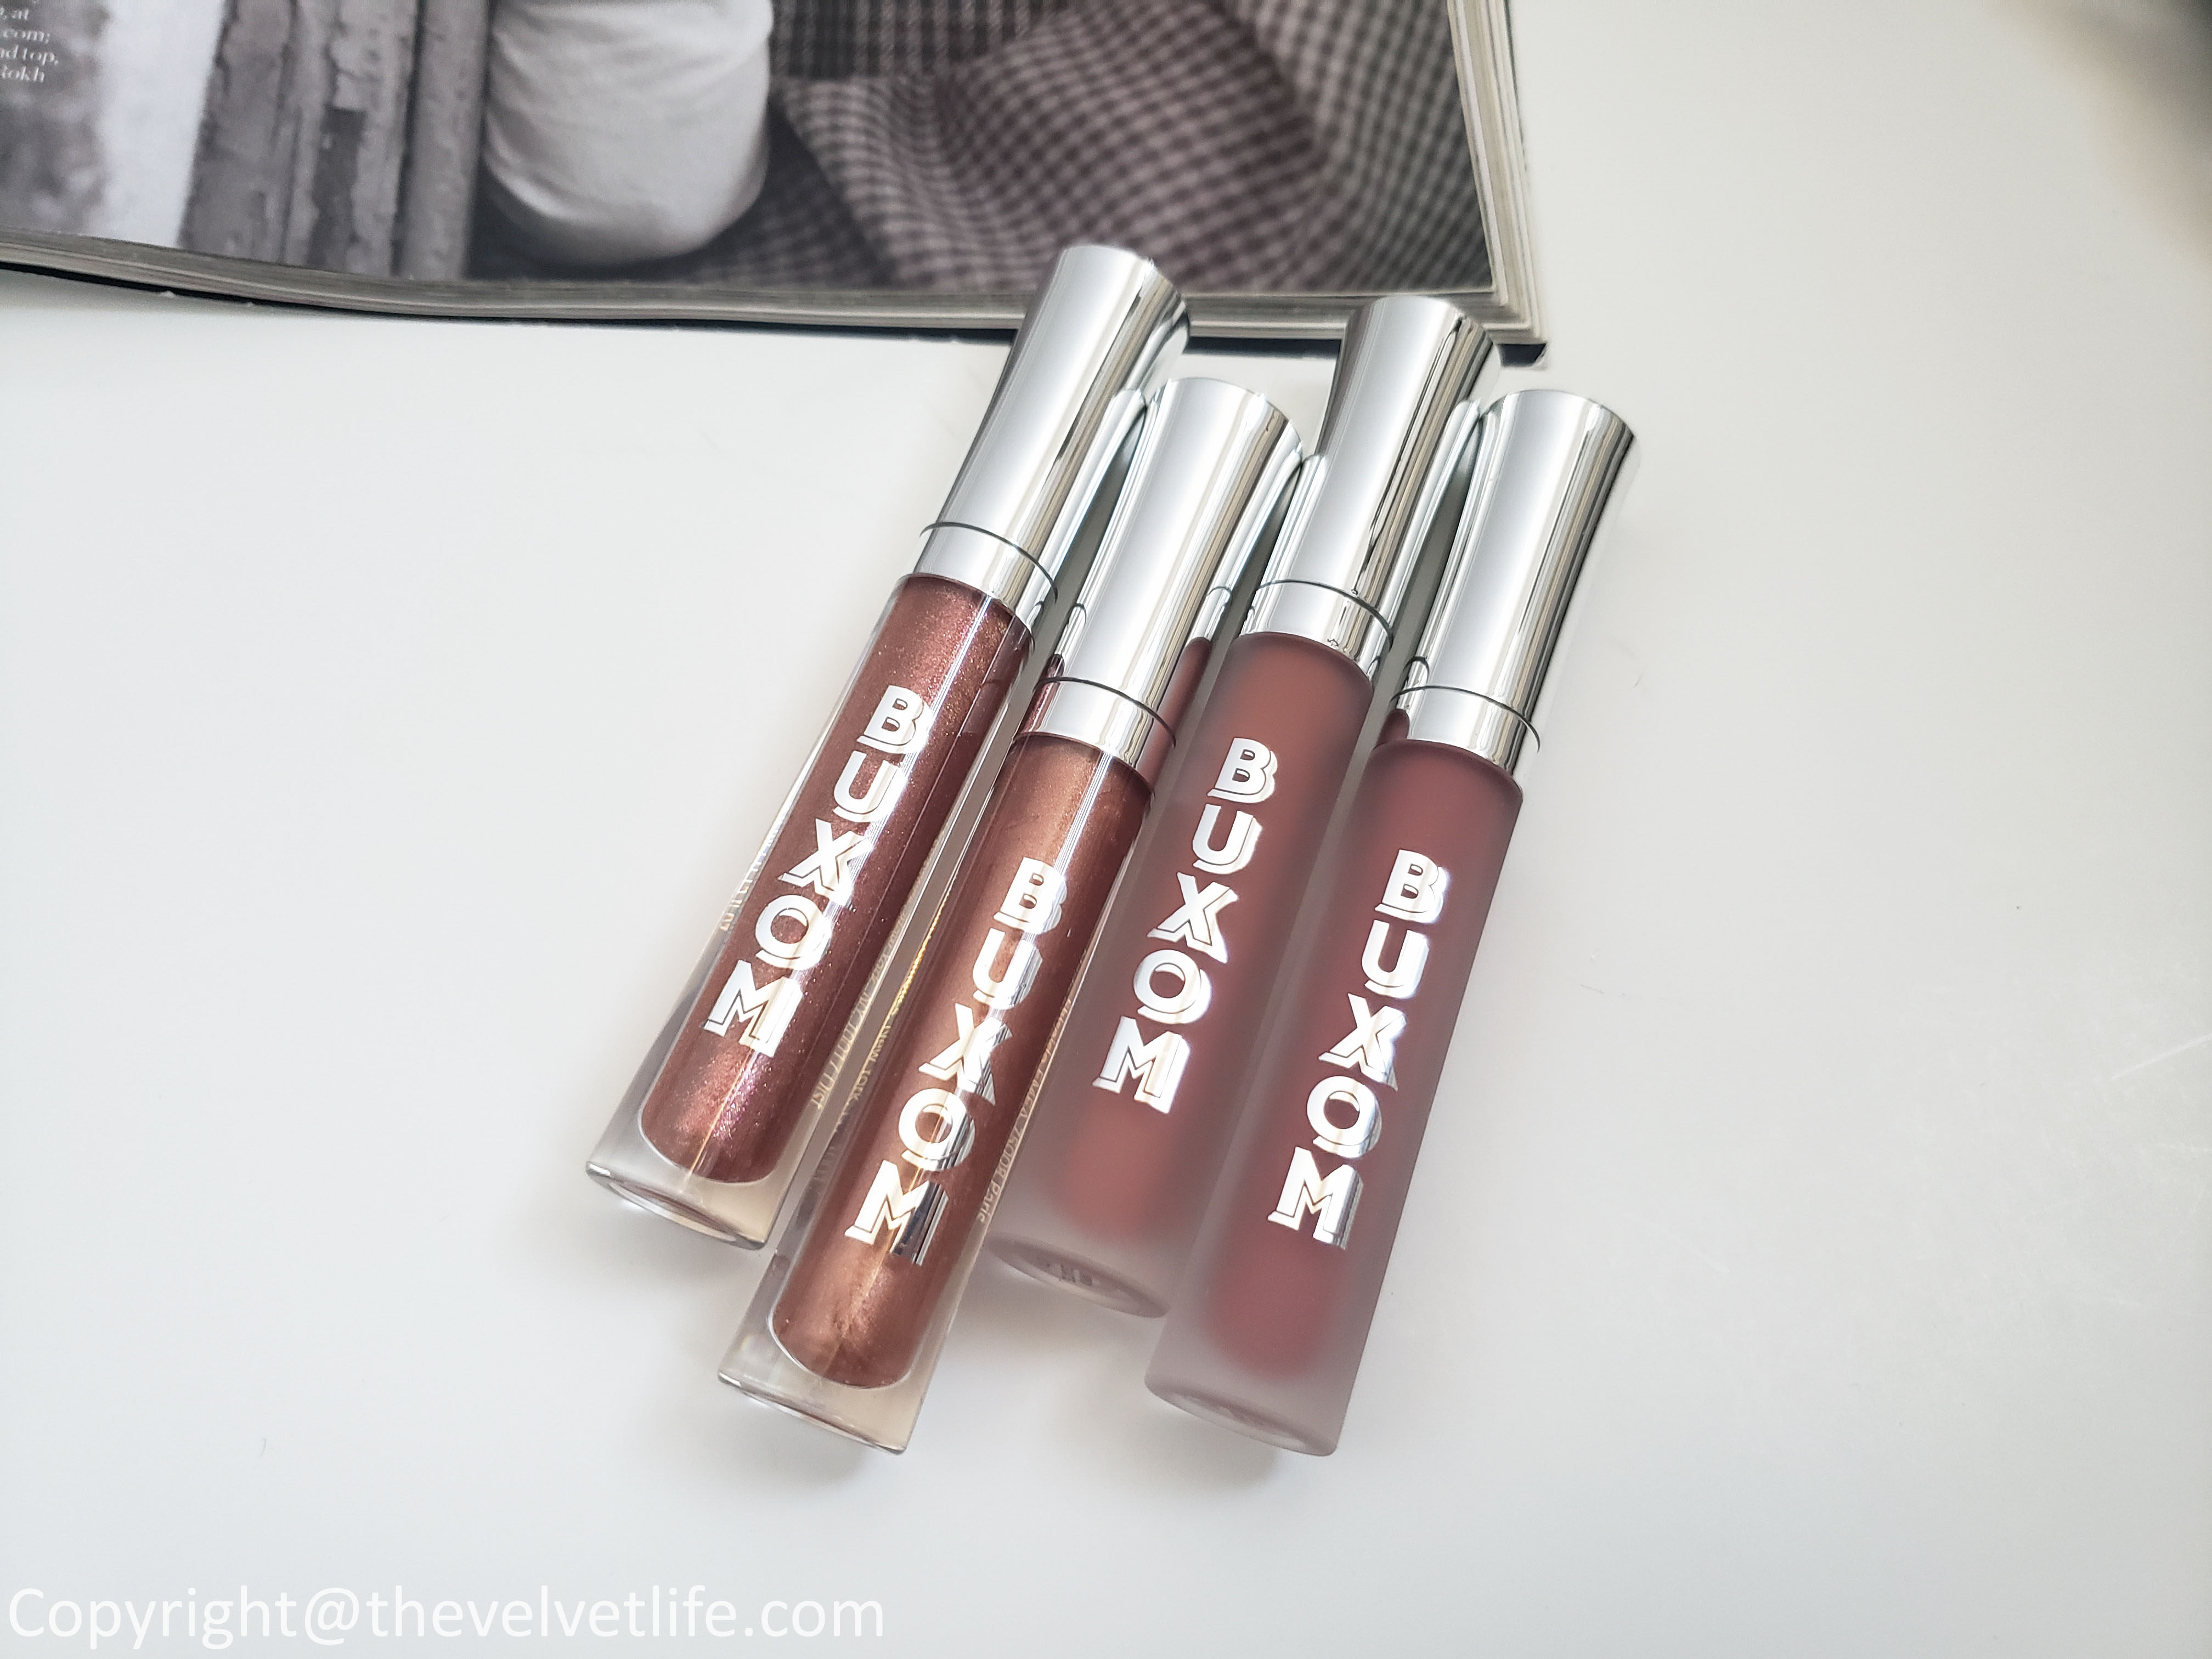 Buxom Full-On Fall Gloss Collection limited-edition review swatches of two Full-On Plumping Lip Polishes and two Full-On Plumping Lip Creams